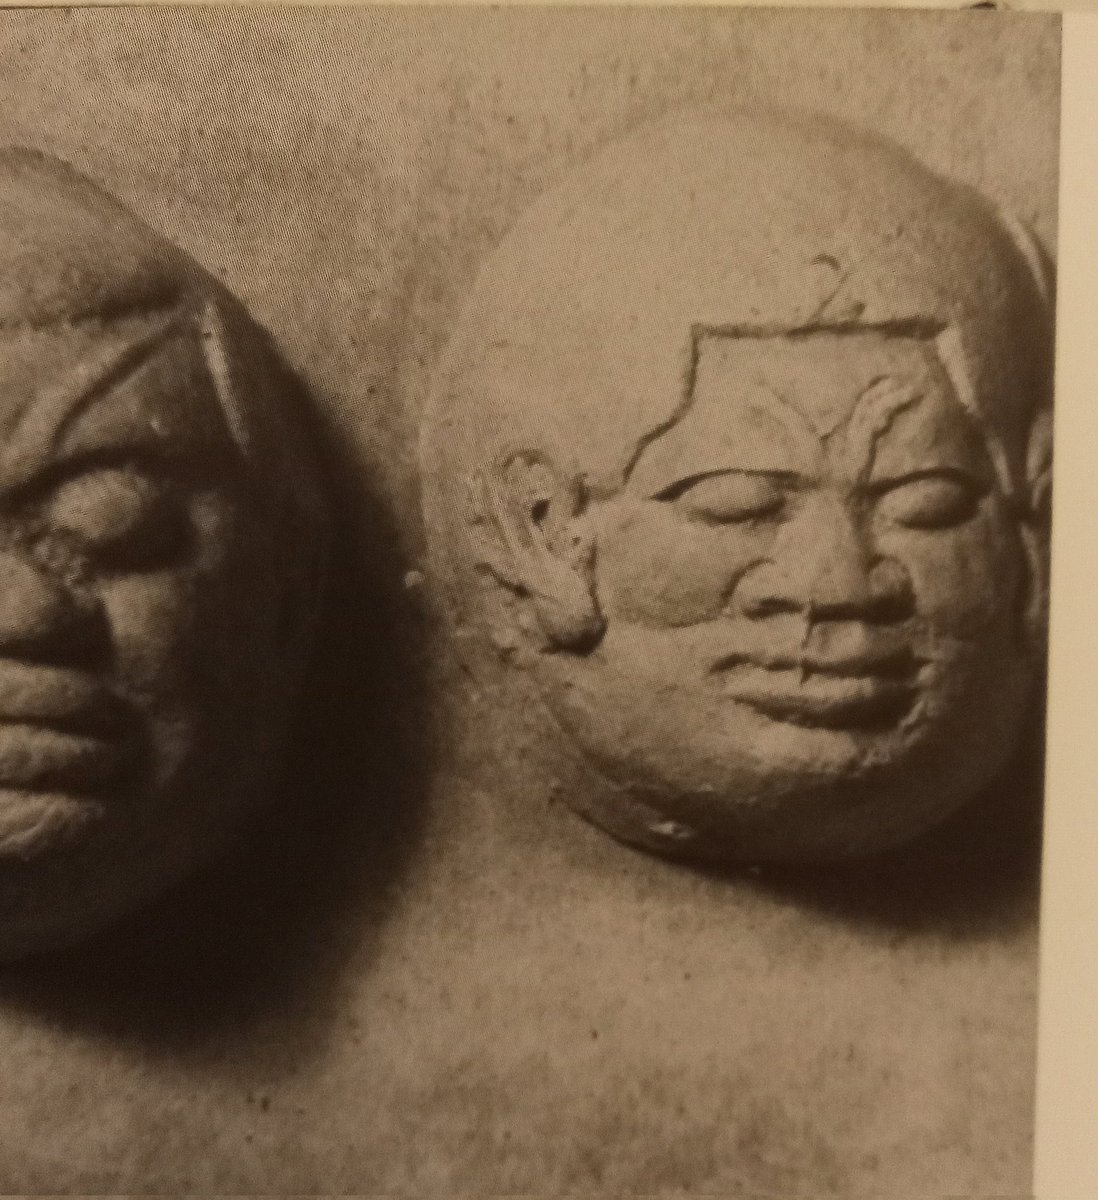 African World History On Twitter Rt Africanworldh Ancient Casts Of Scarabs With The Face Of